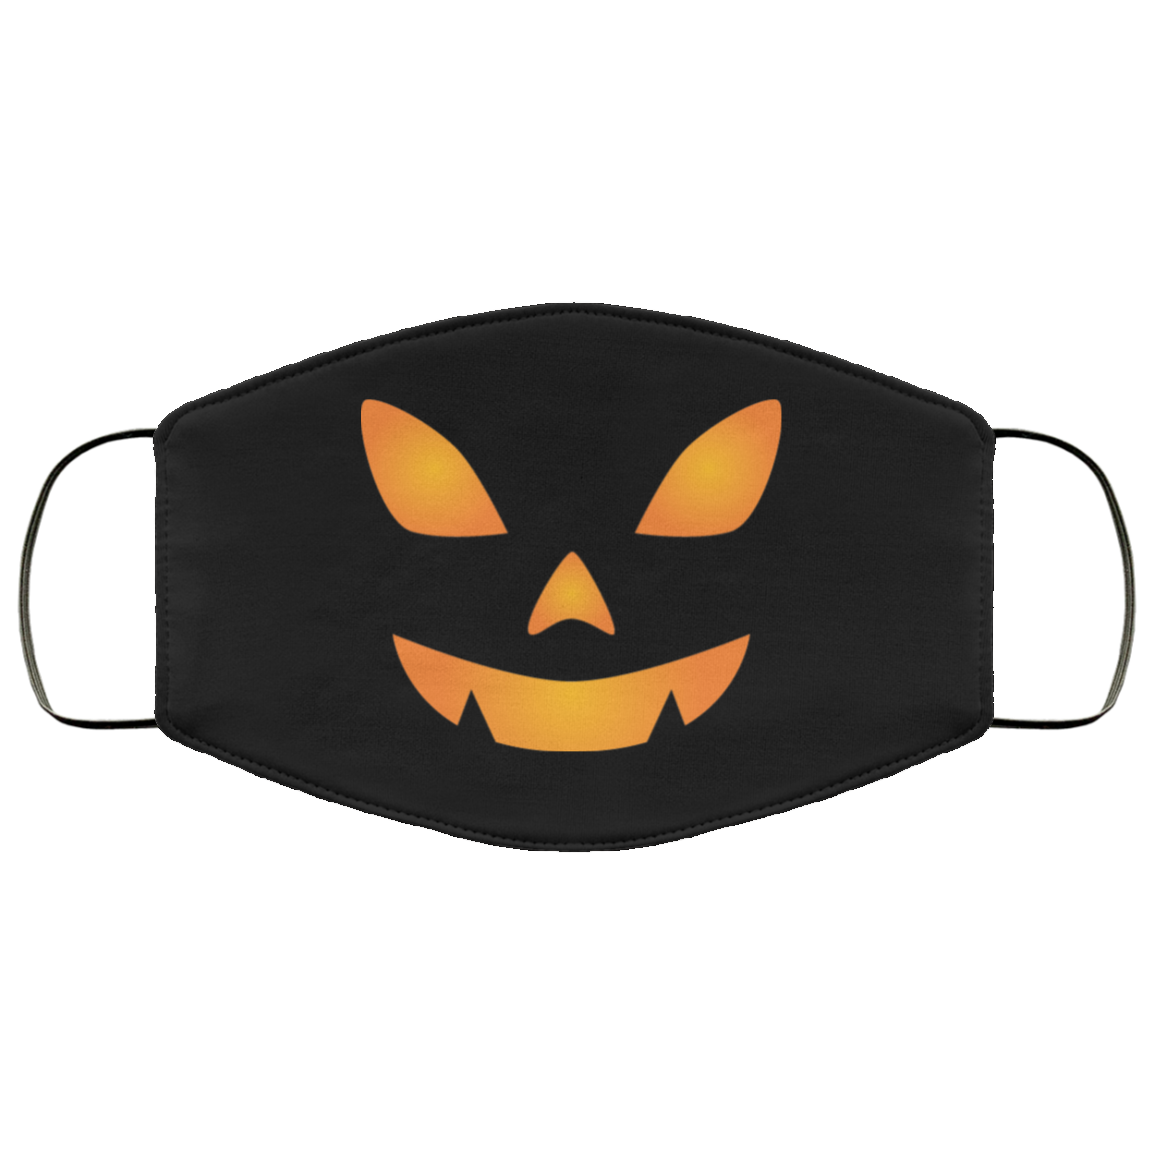 Download PNG image - Halloween Face Mask PNG HD 